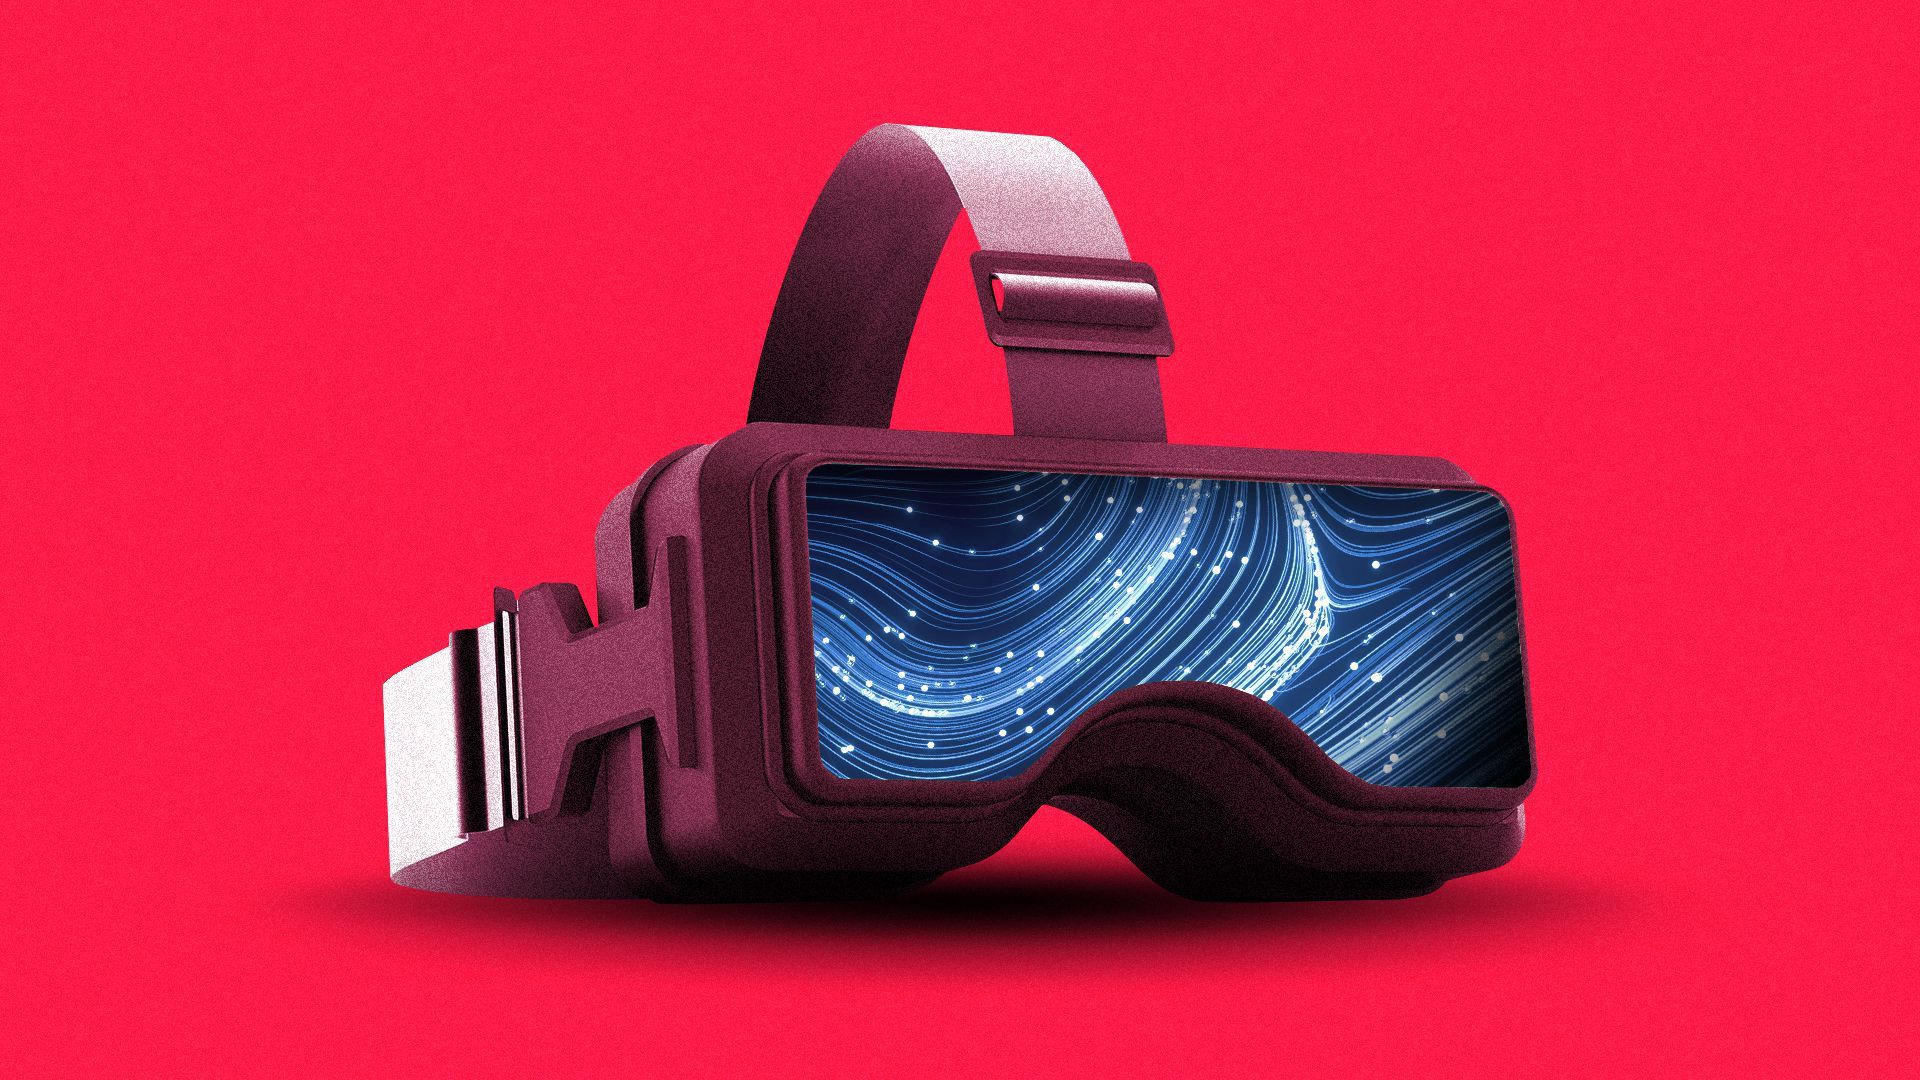 Illustration of a virtual reality headset.